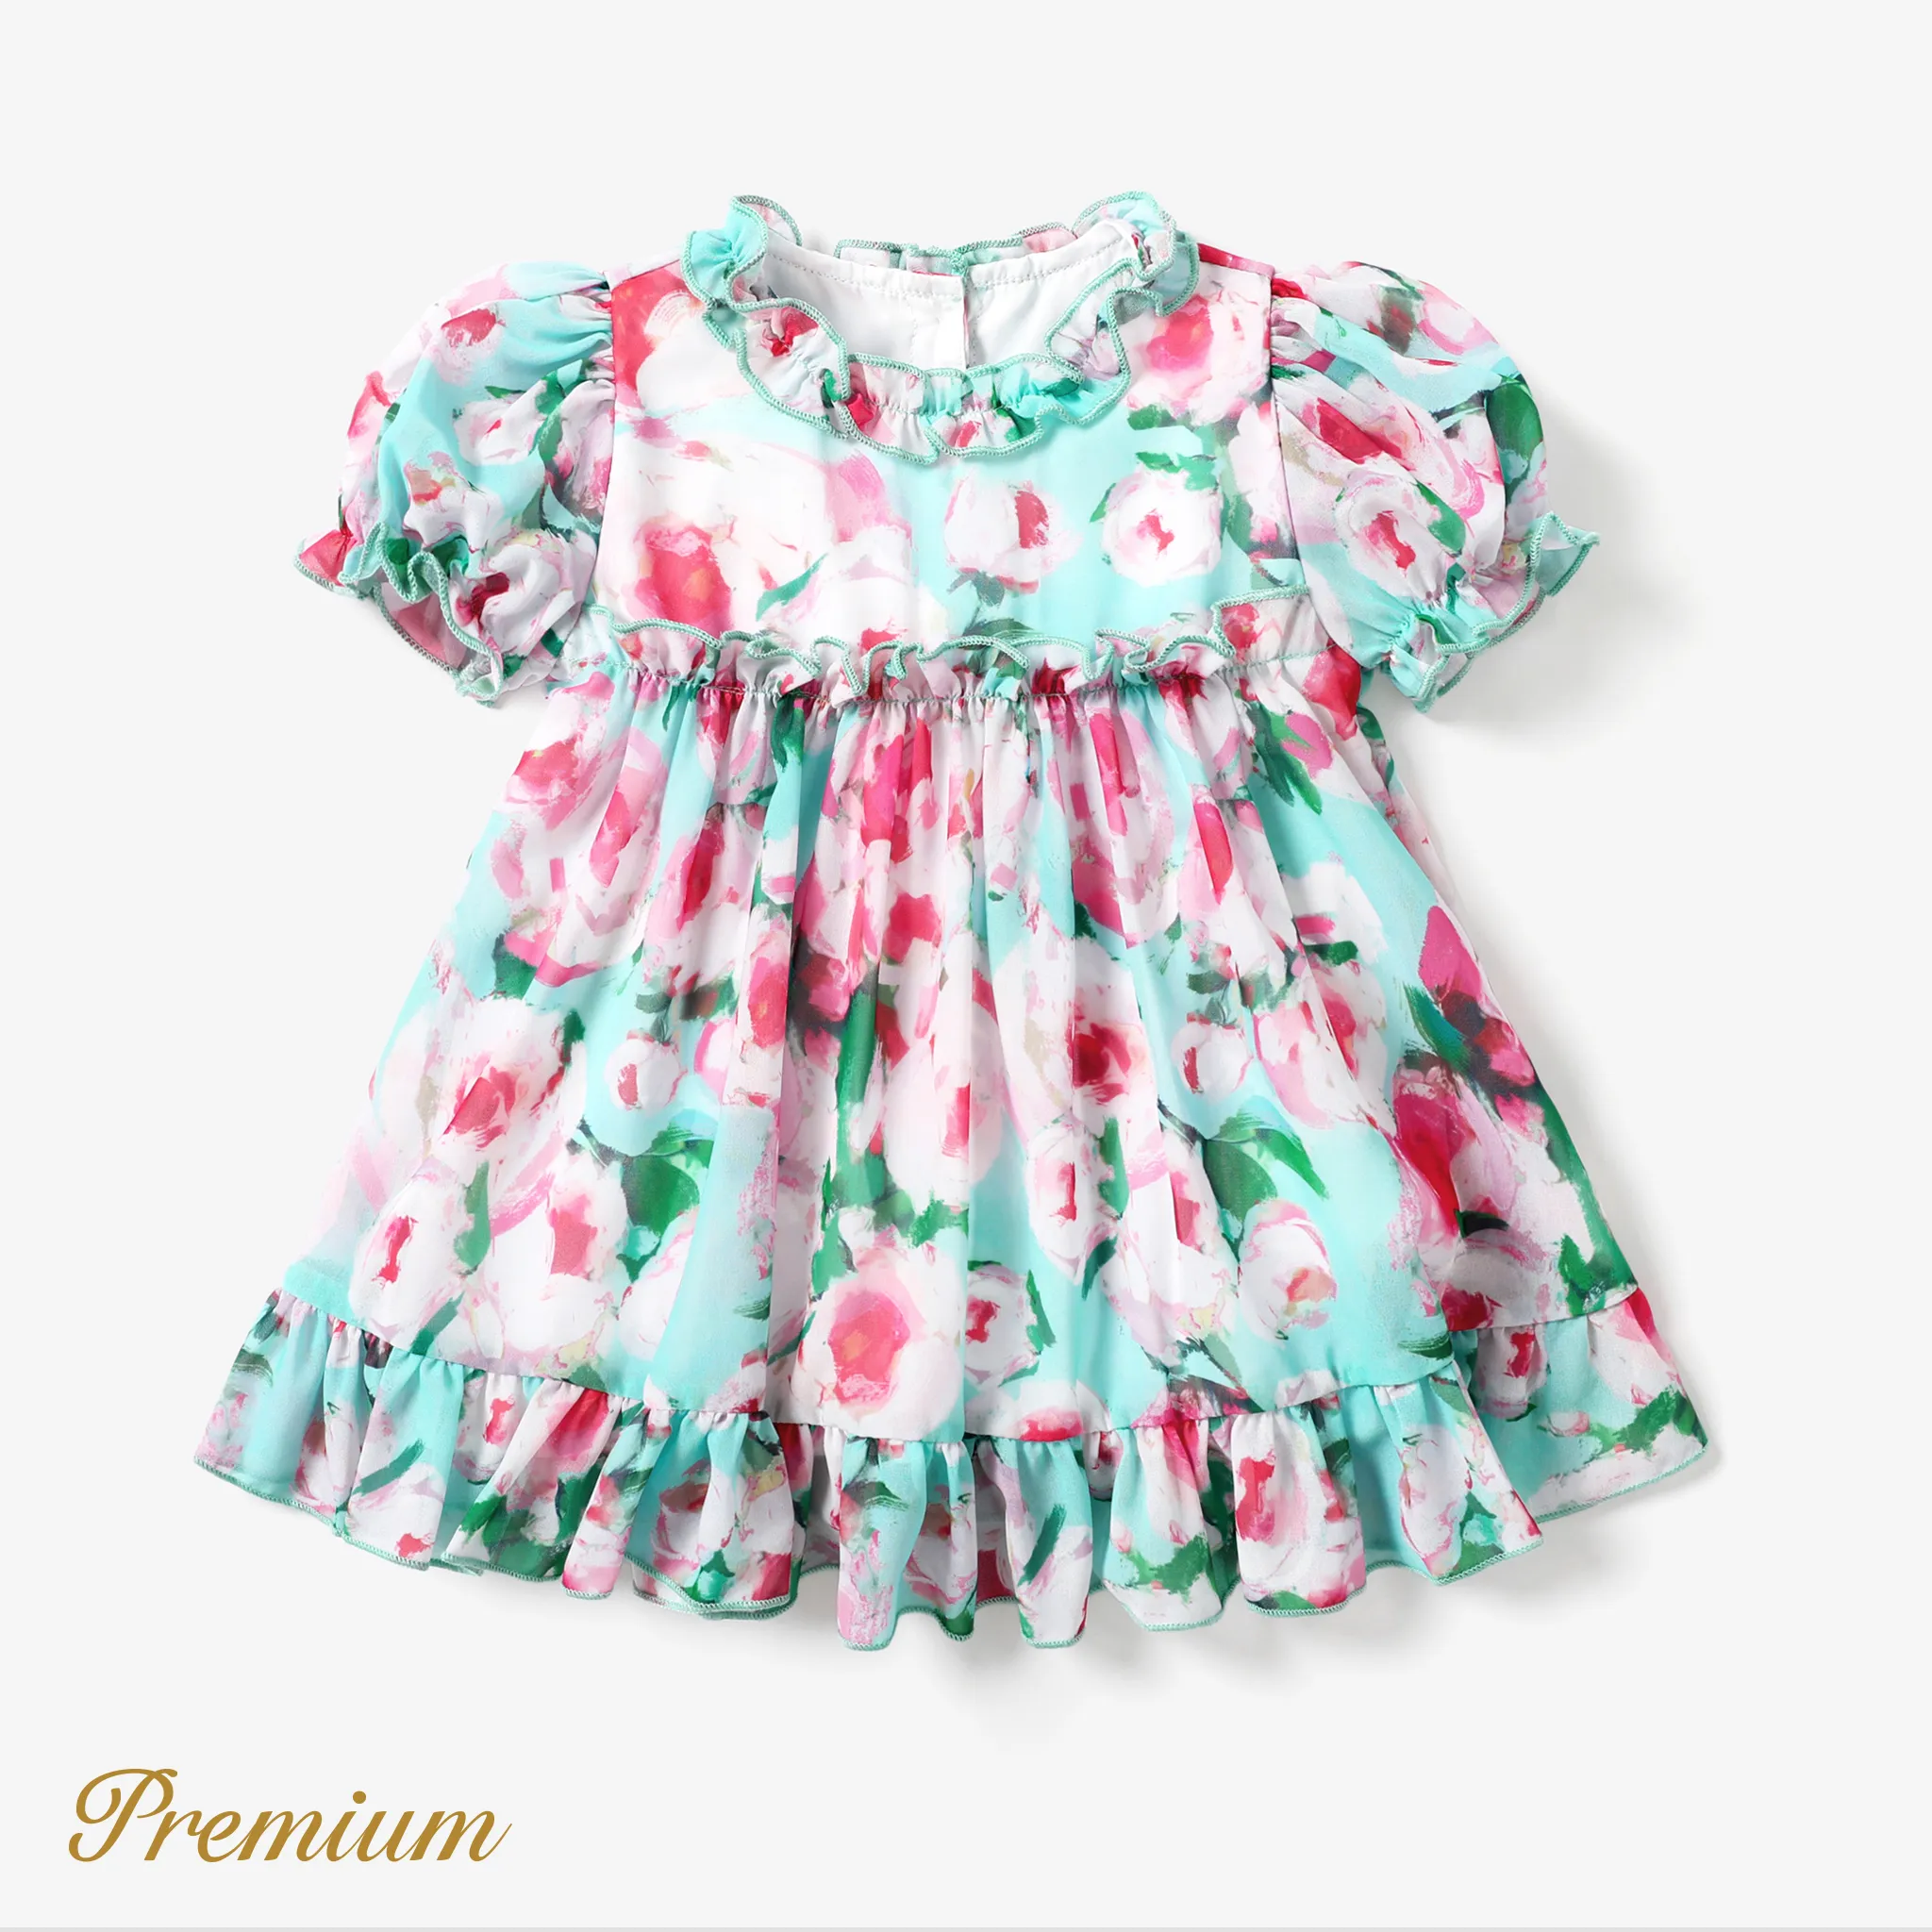 Toddler/Kid  Girl's Elegant Dress With Agaric Edge And Big Flower Pattern